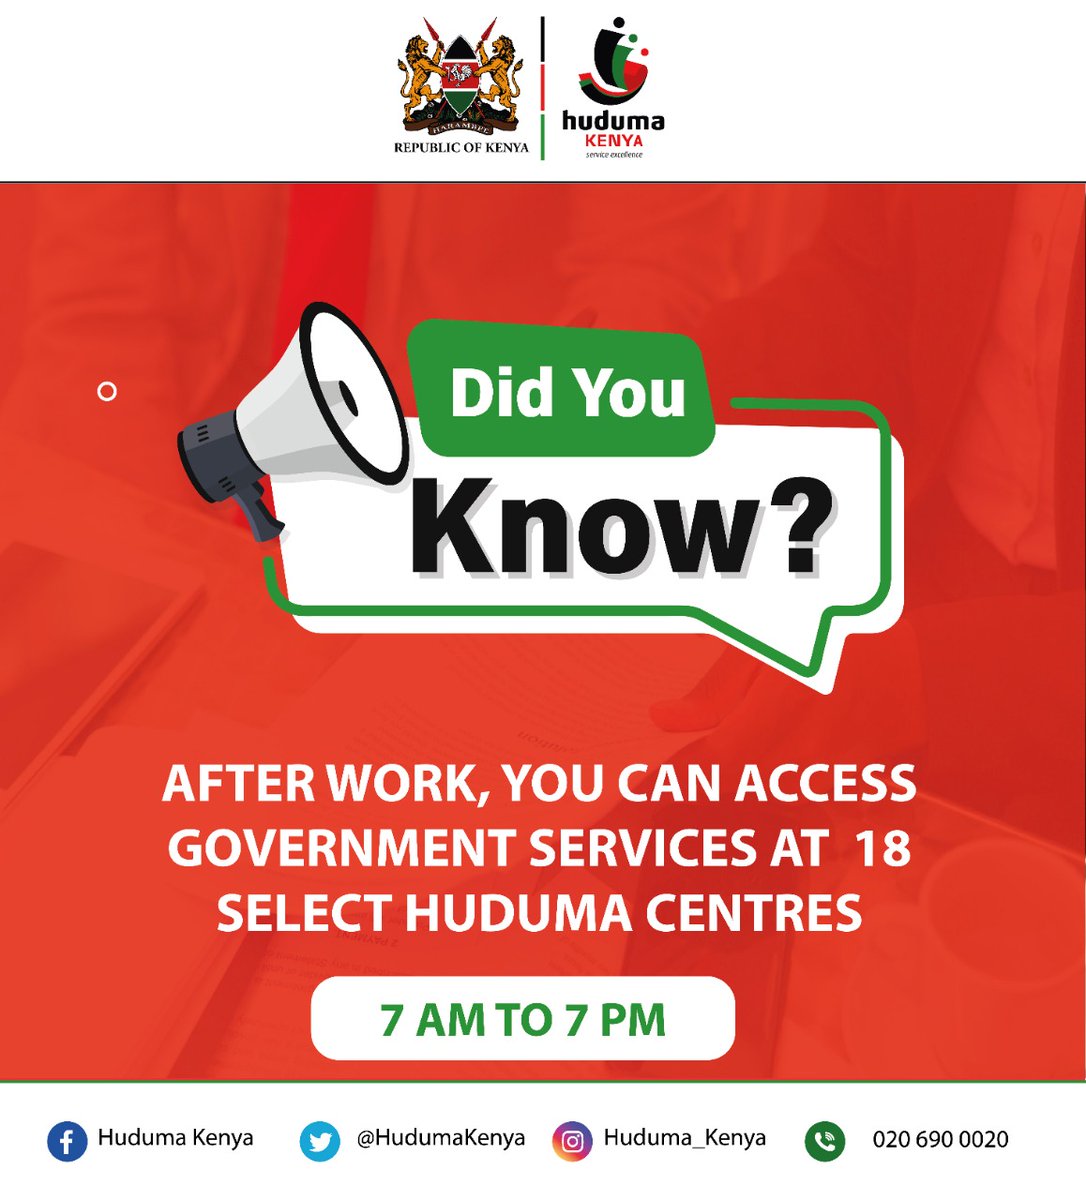 We understand the value of your time. That's why #HudumaCenters operate from 7 a.m. to 7 p.m, providing you with greater flexibility.